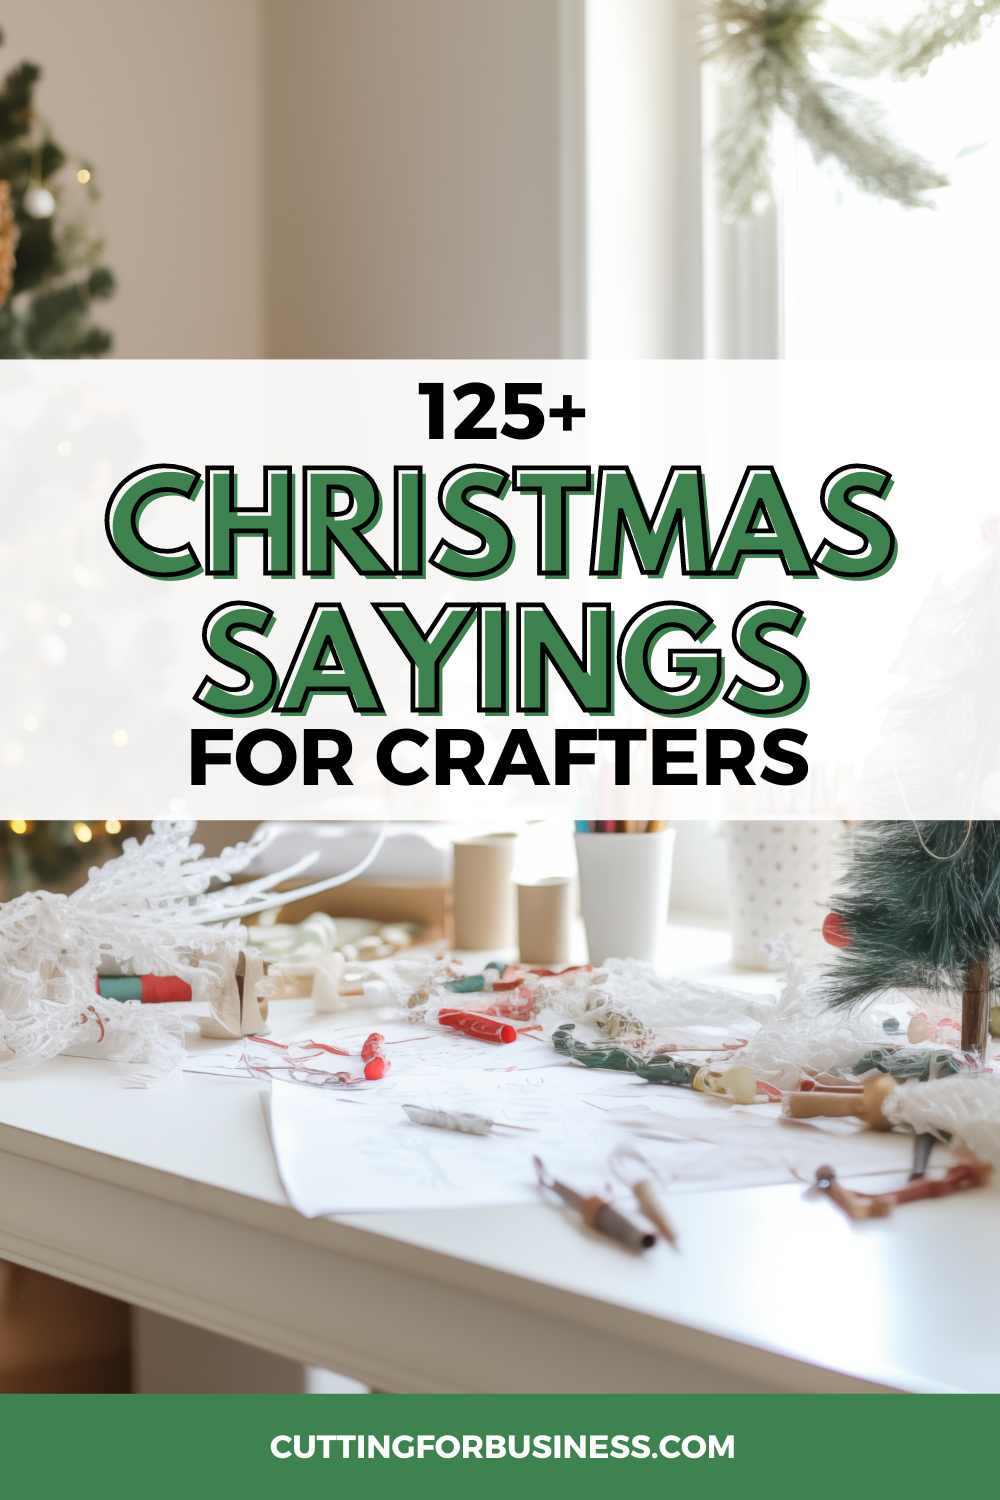 150+ Christmas and Holiday Sayings for Crafters - cuttingforbusiness.com